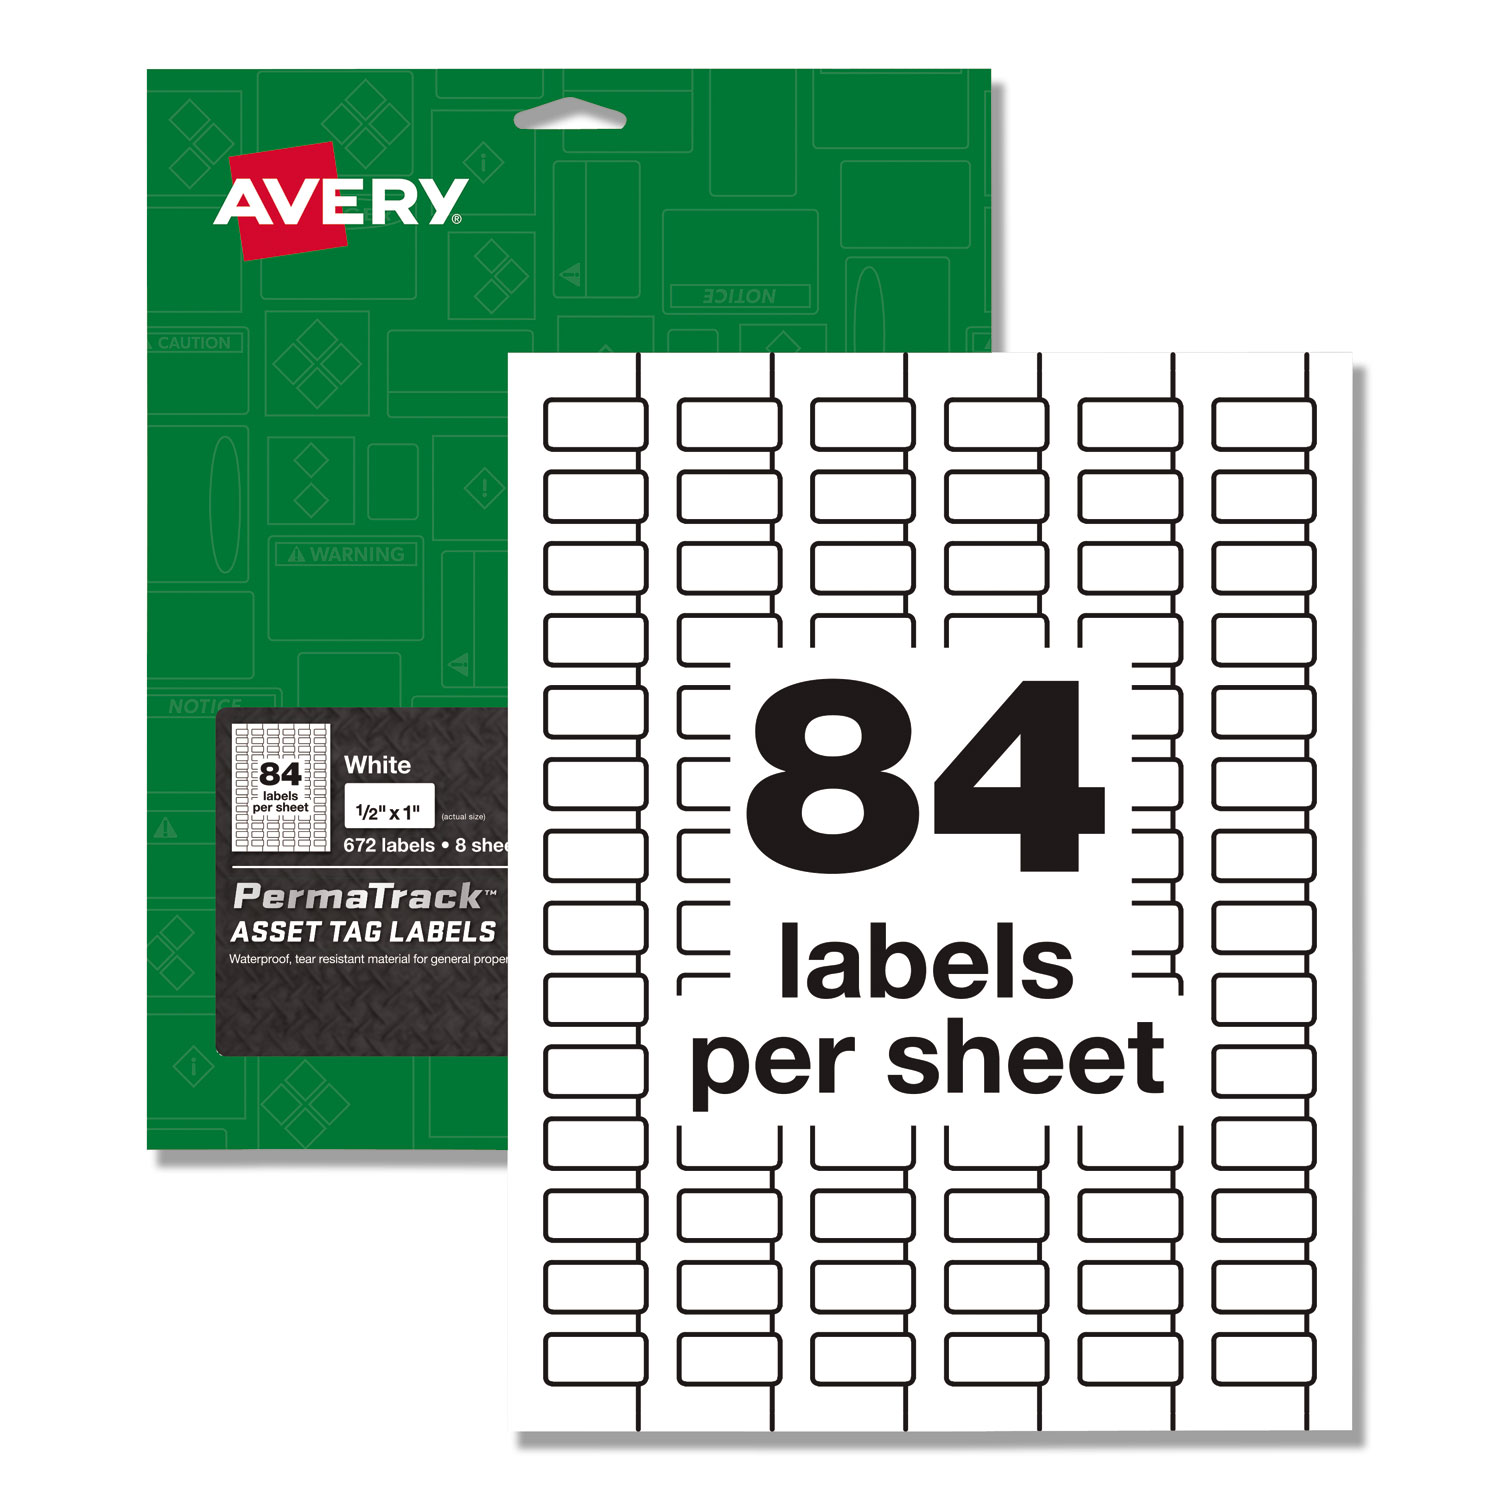  Avery 61527 PermaTrack Durable White Asset Tag Labels, Laser Printers, 0.5 x 1, White, 84/Sheet, 8 Sheets/Pack (AVE61527) 